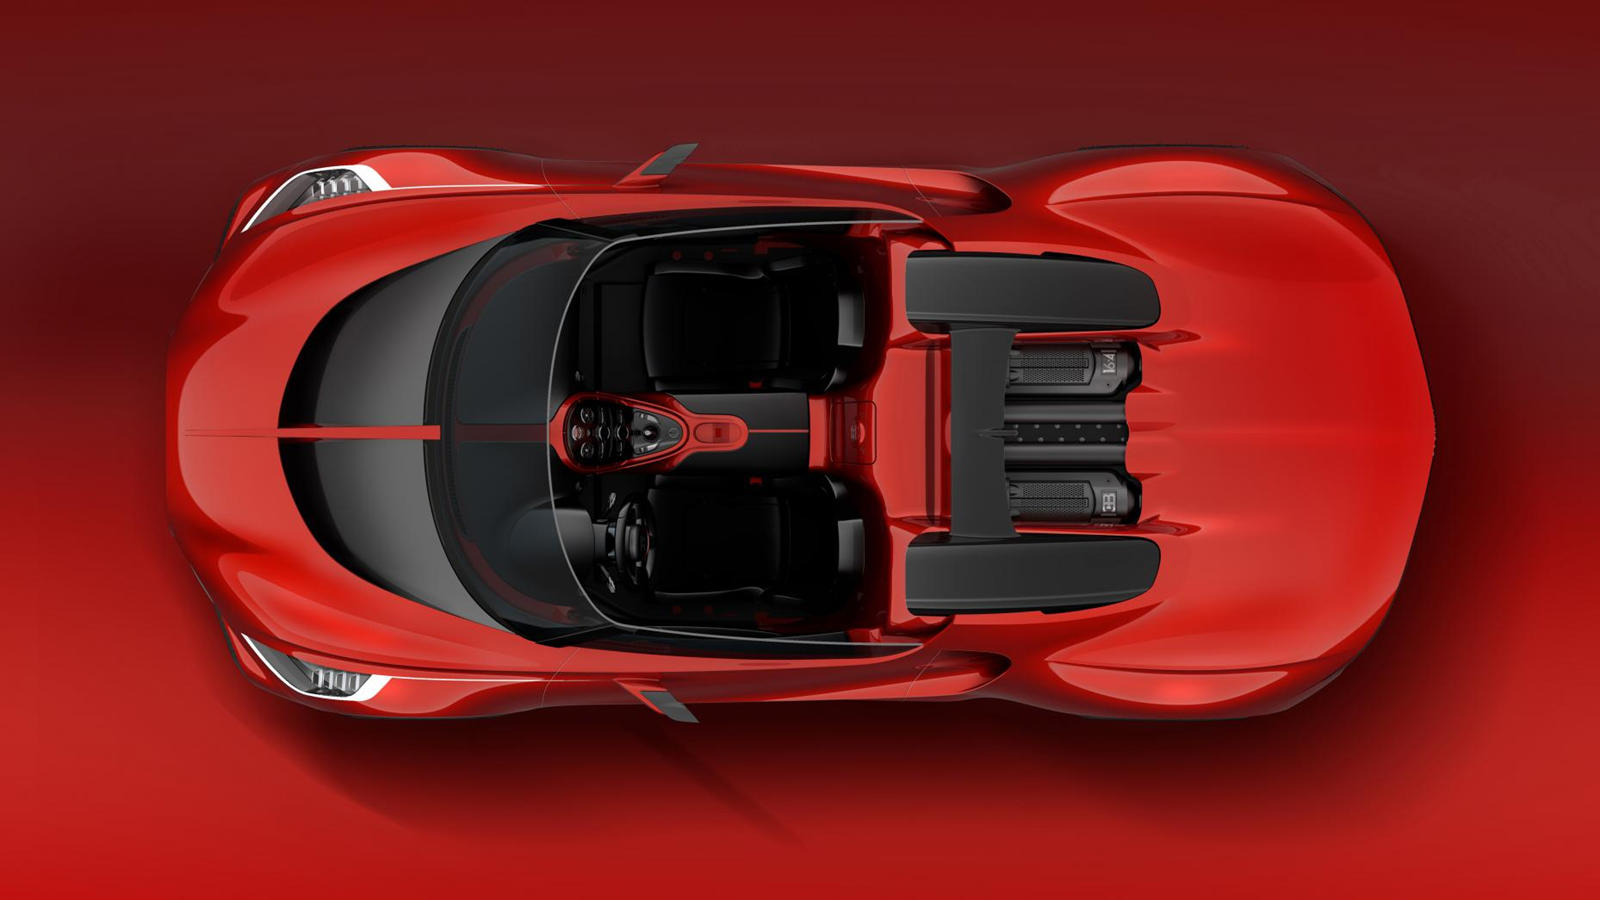 Top-down view of the Veyron Barchetta showing the passenger cabin.